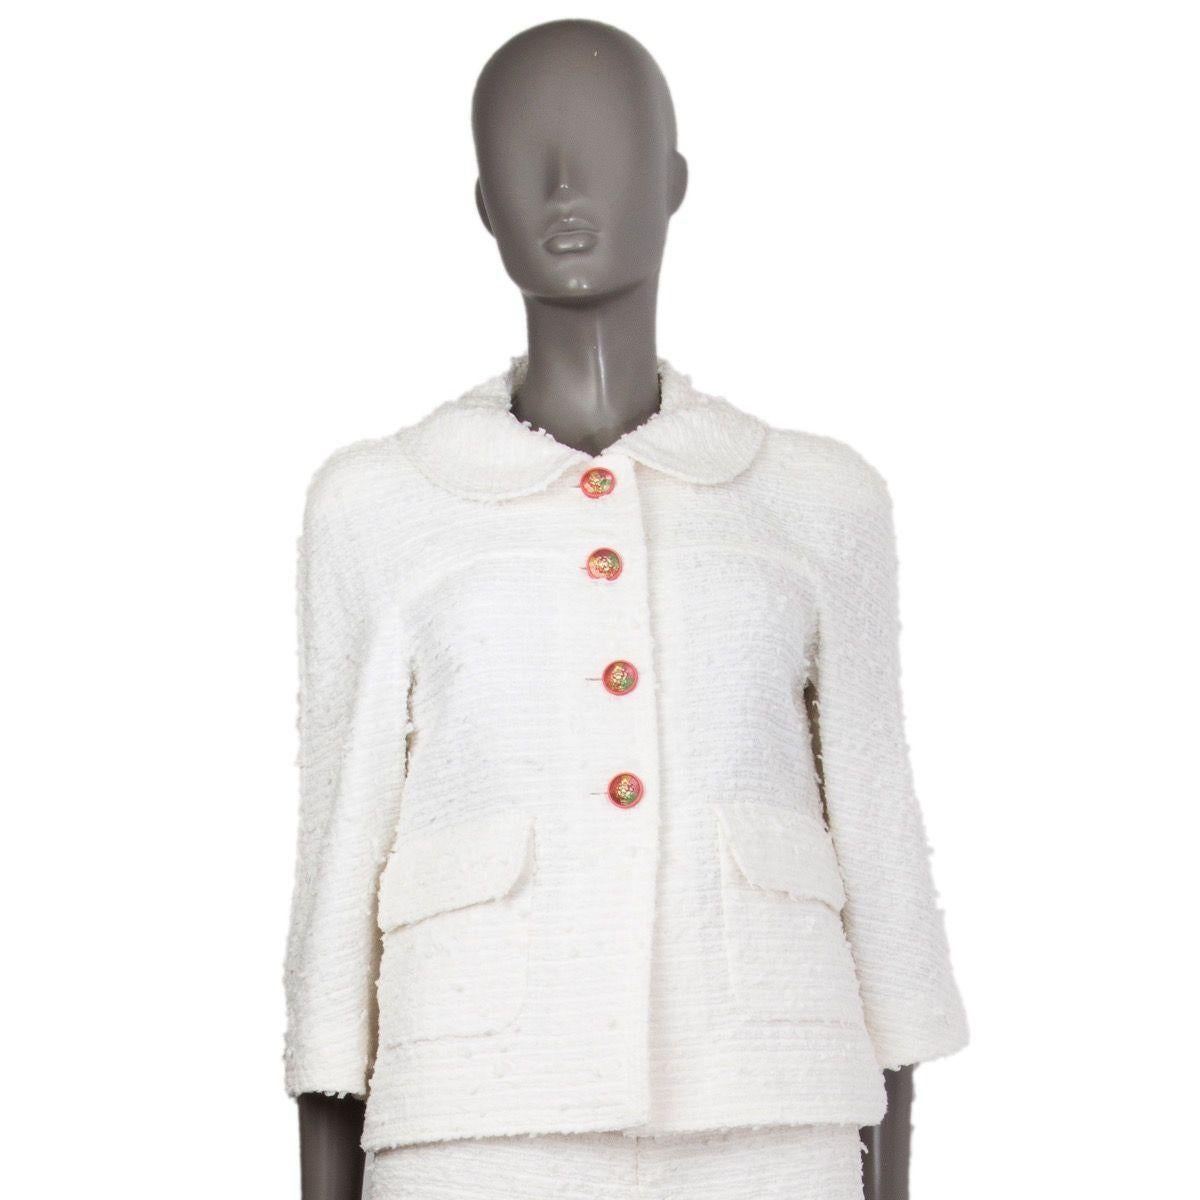 Chanel boucle blazer in white nylon (58%), cotton (31%), and wool (11%). With peter-pan collar, rounded slits on the sleeves and side seams, 3/4 sleeves, and two flap pockets on the front. Closes with lion-crest button on the front in pink, gold,